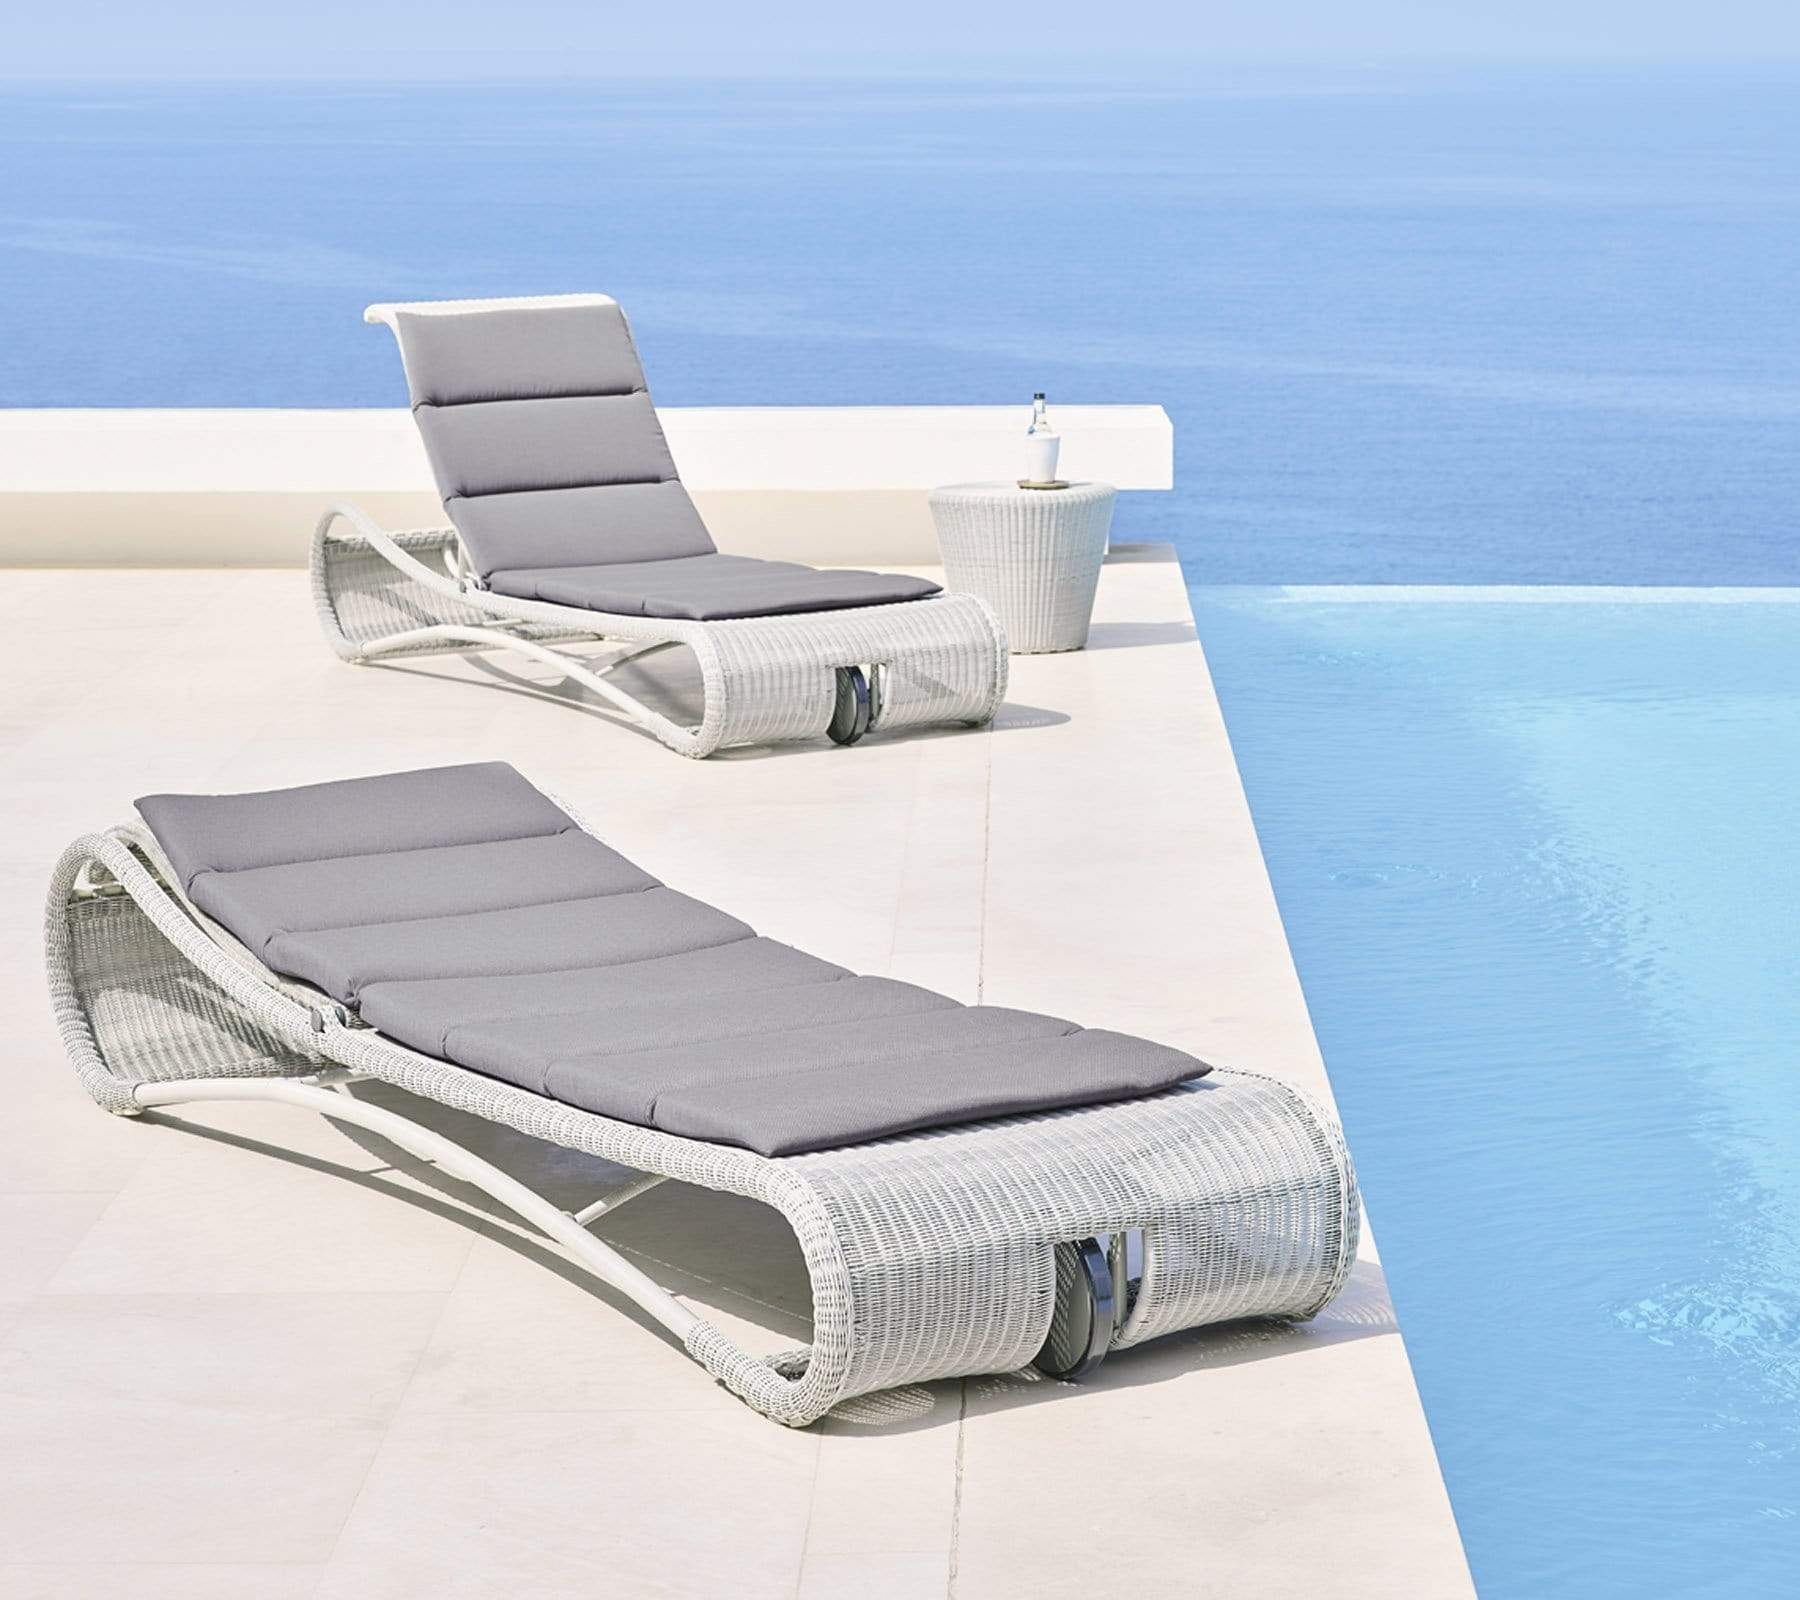 Boxhill's Escape Pool Side Sunbed White Grey Weave with Grey Cushion lifestyle image beside the pool